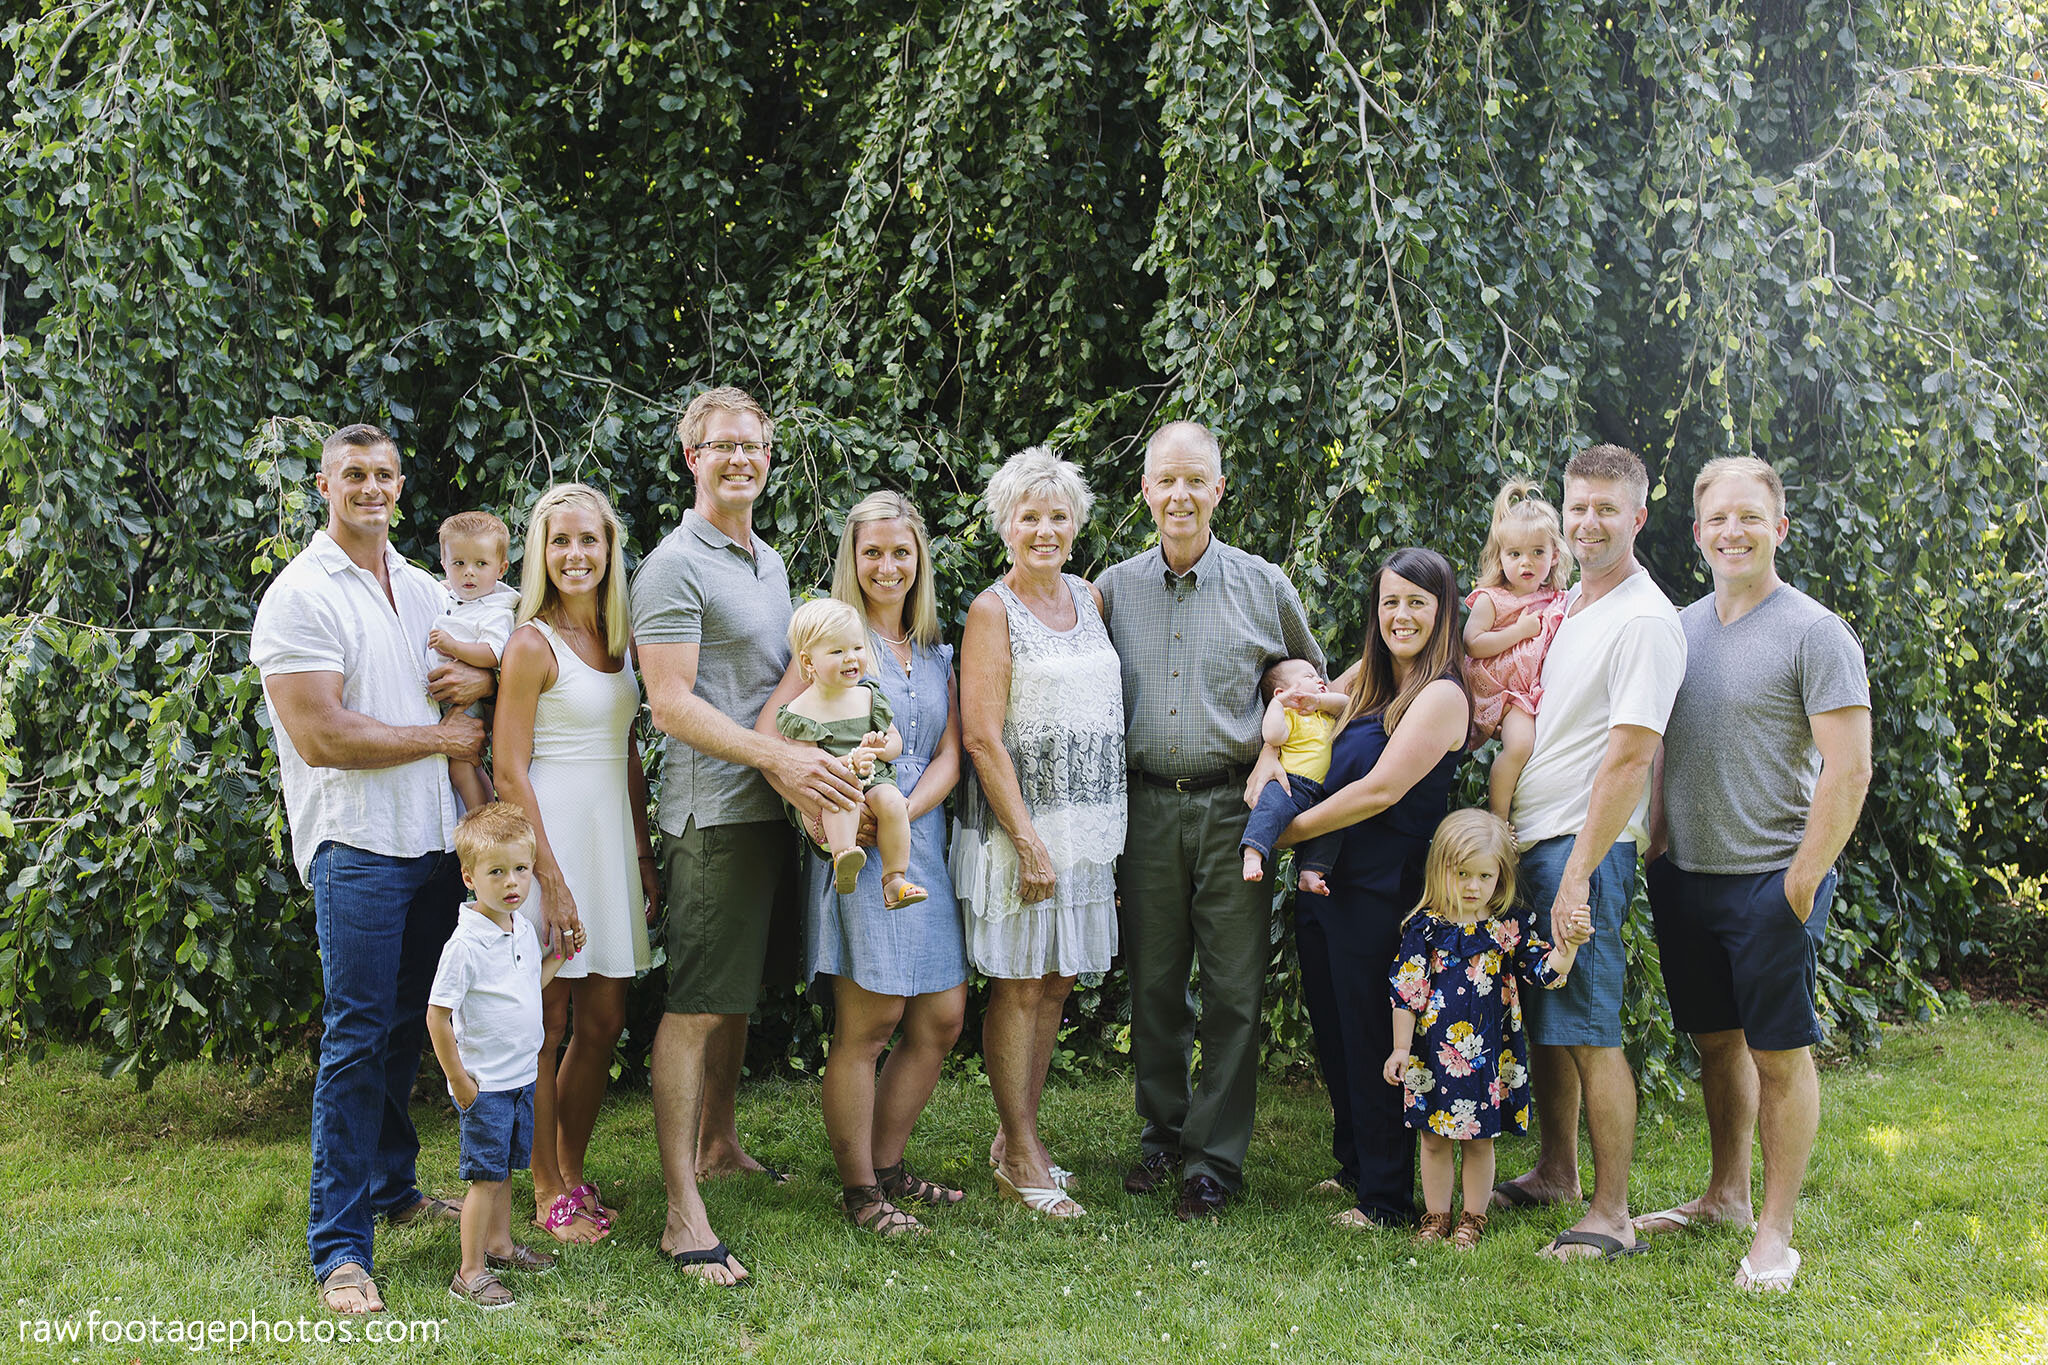 london_ontario_family_photographer-extended_family_session-grandparents-cousins-backyard_session-civic_gardens-raw_footage_photography-021.jpg